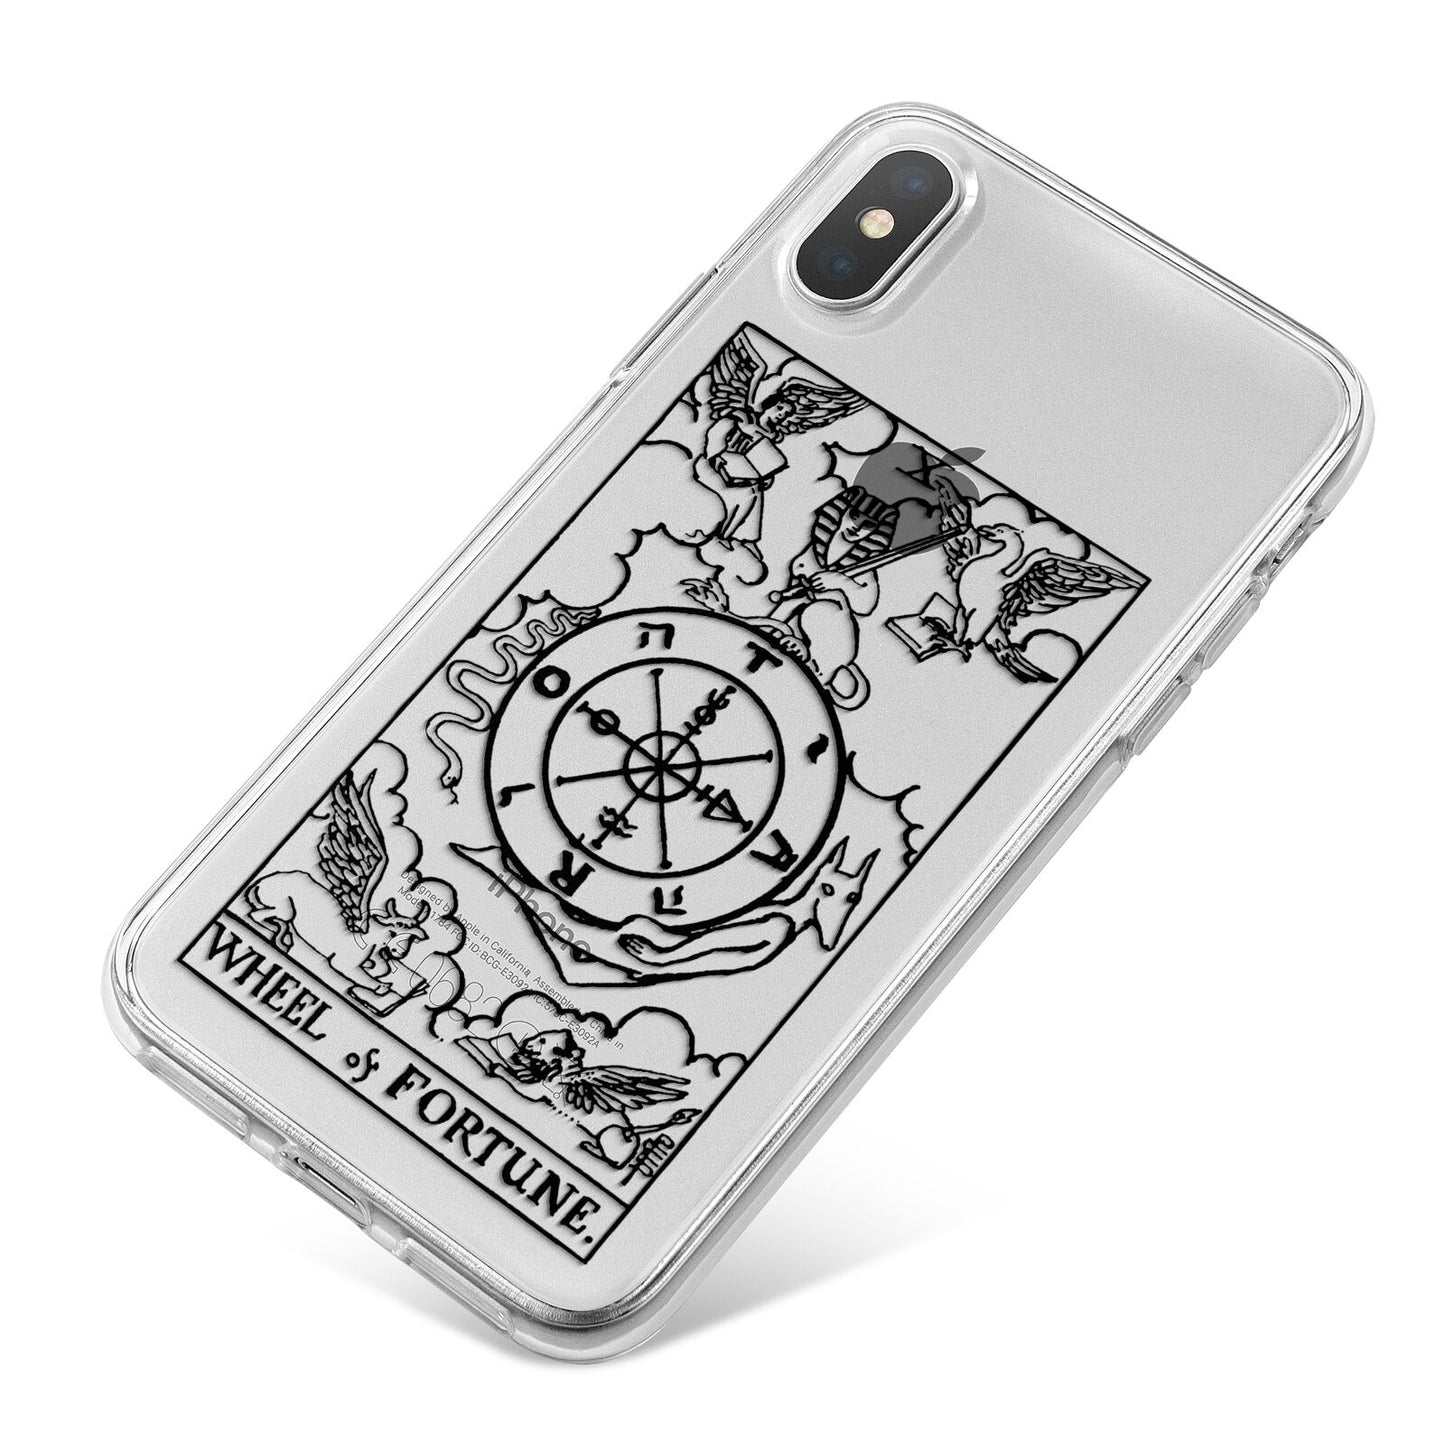 Wheel of Fortune Monochrome Tarot Card iPhone X Bumper Case on Silver iPhone